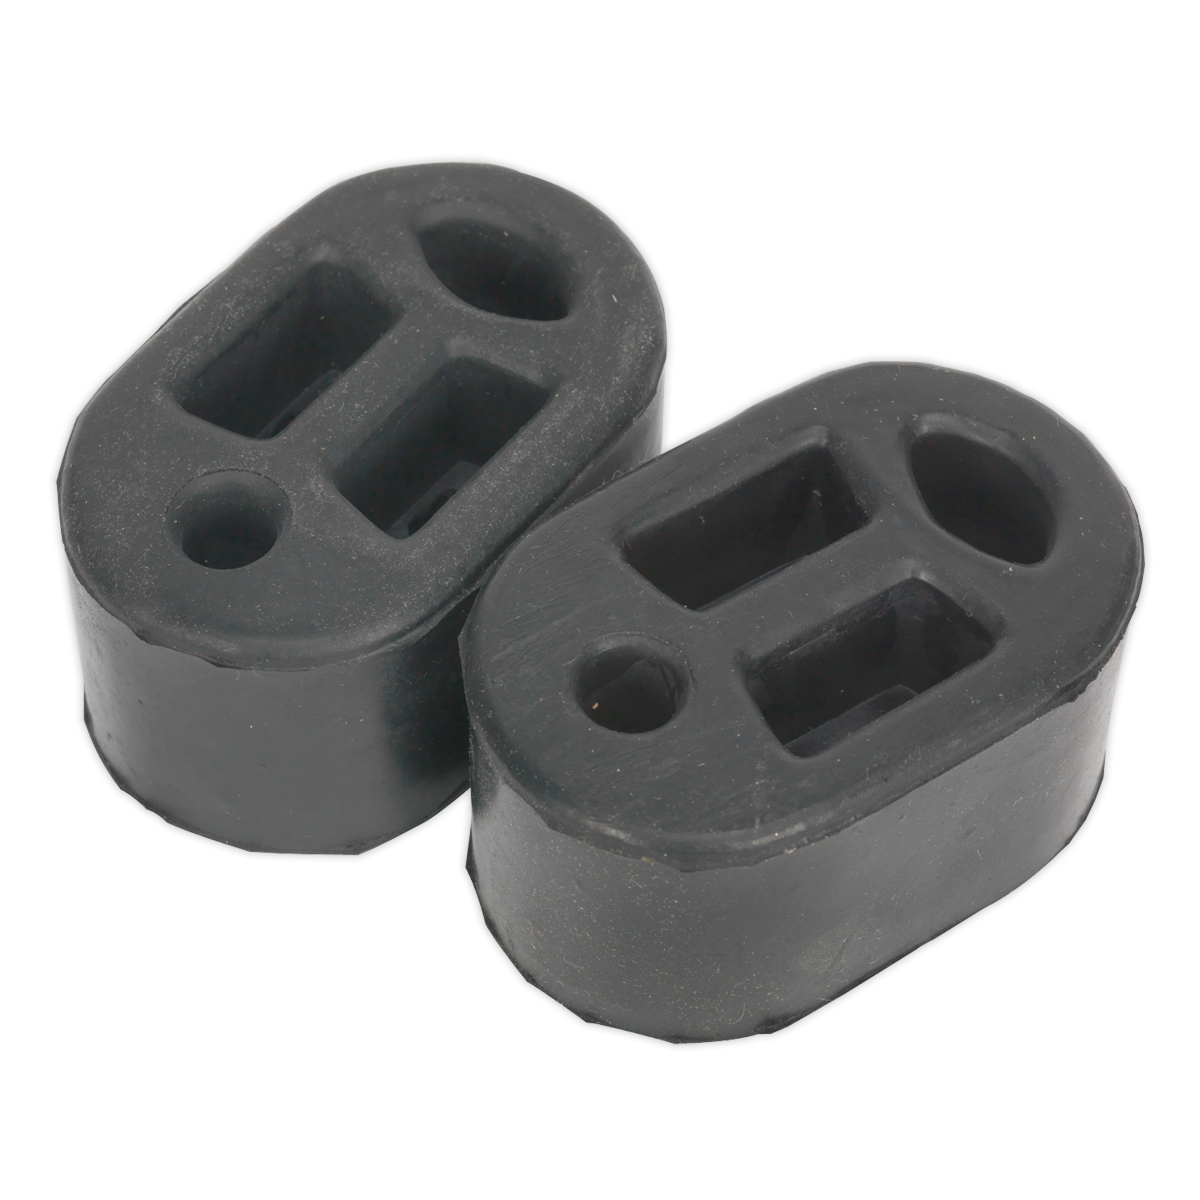 Sealey Exhaust Mounting Rubbers L70 x D45 x H37 (Pack of 2)